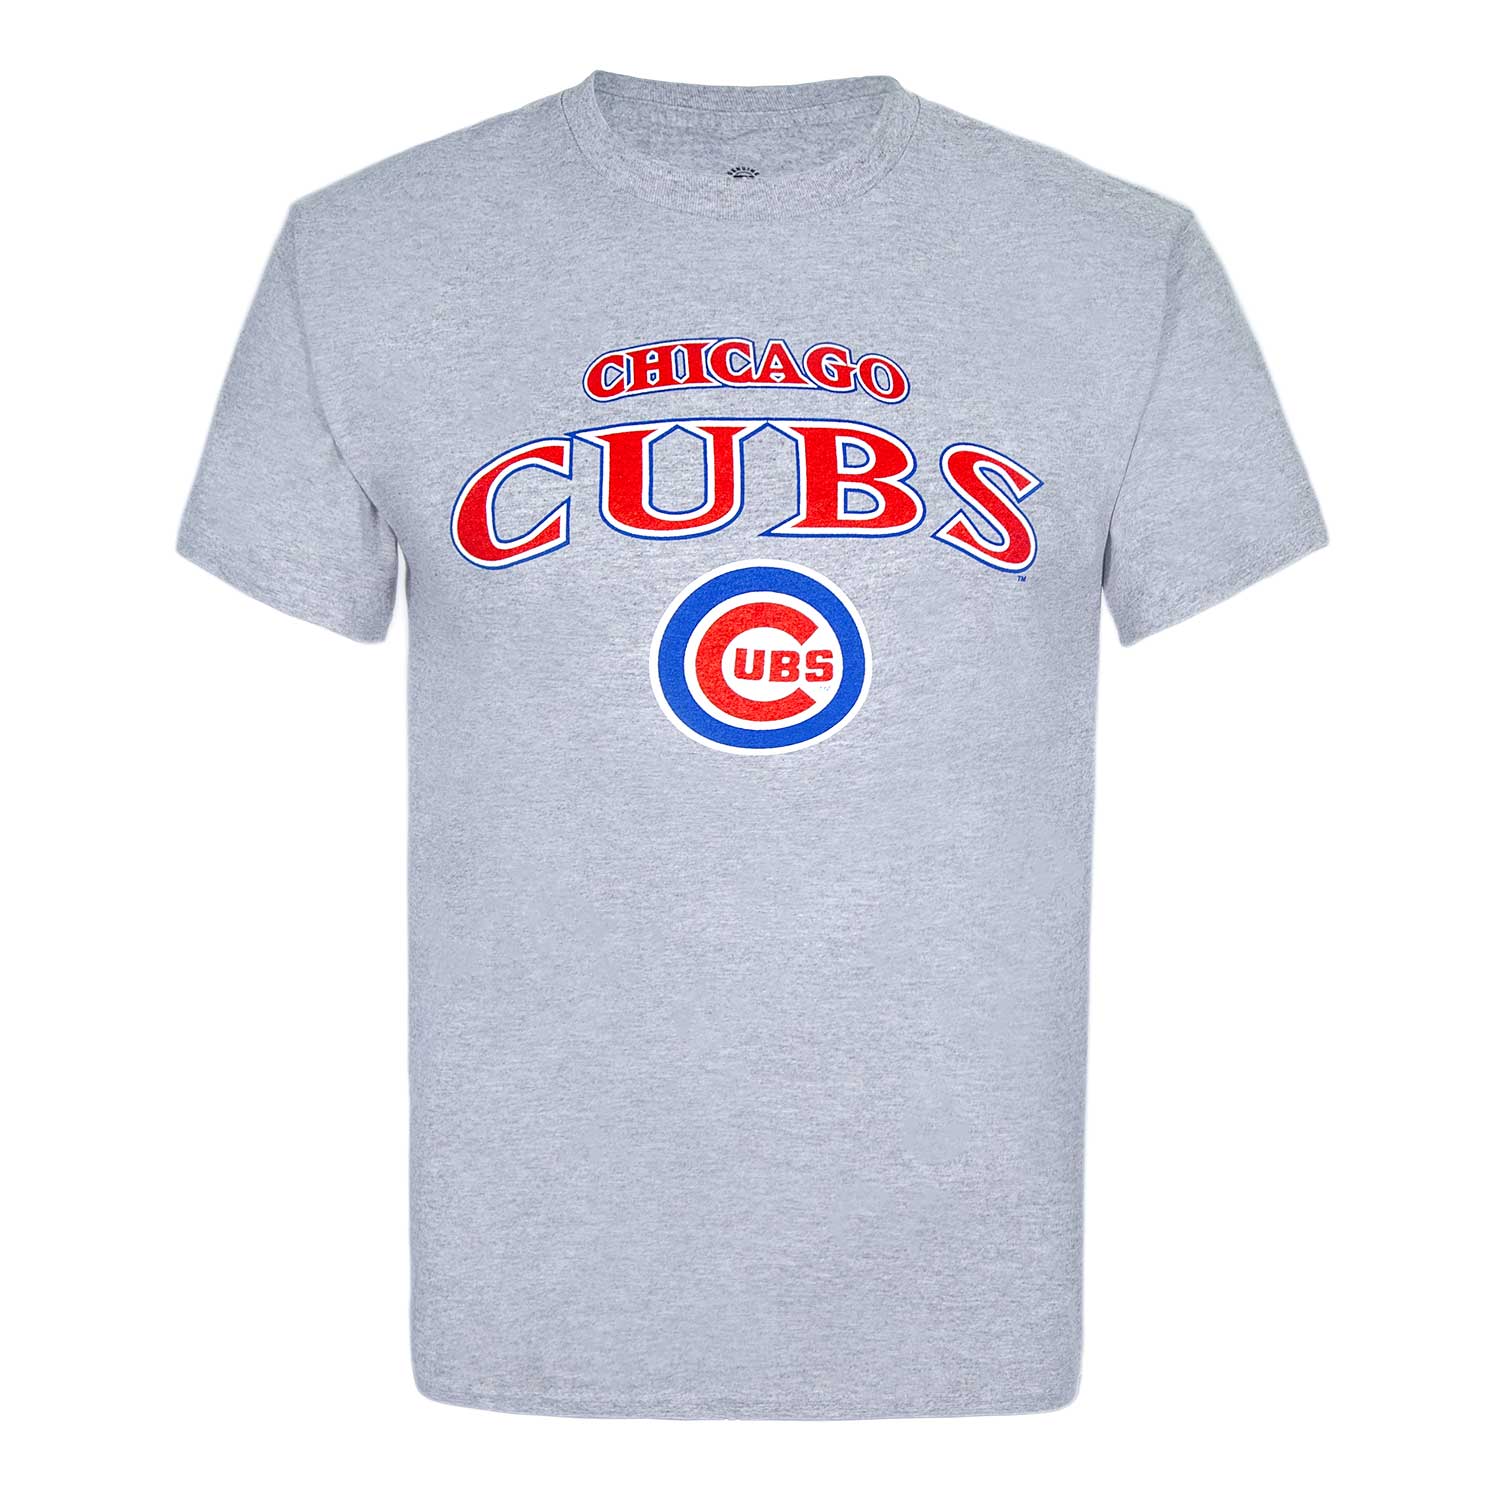 Chicago Cubs Apparel and Merchandise by Wrigleyville Sports: Get